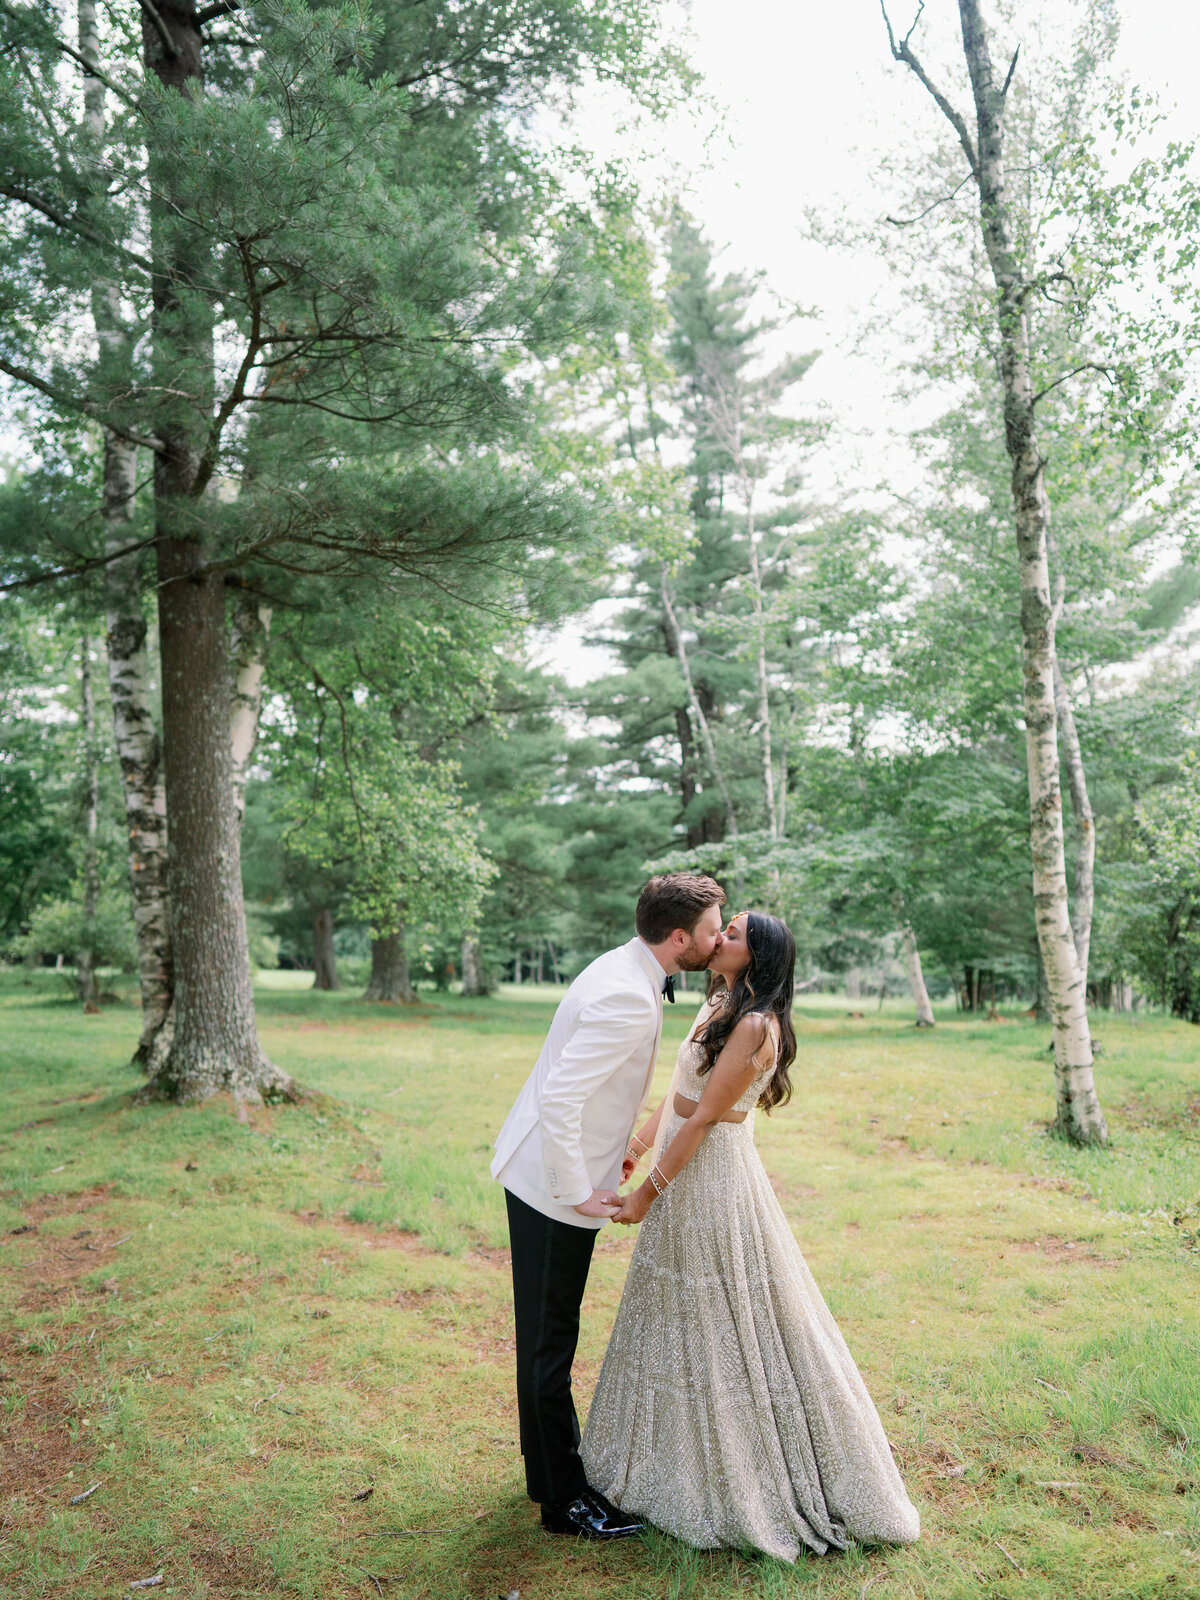 Liz Andolina Photography Destination Wedding Photographer in Italy, New York, Across the East Coast Editorial, heritage-quality images for stylish couples-722